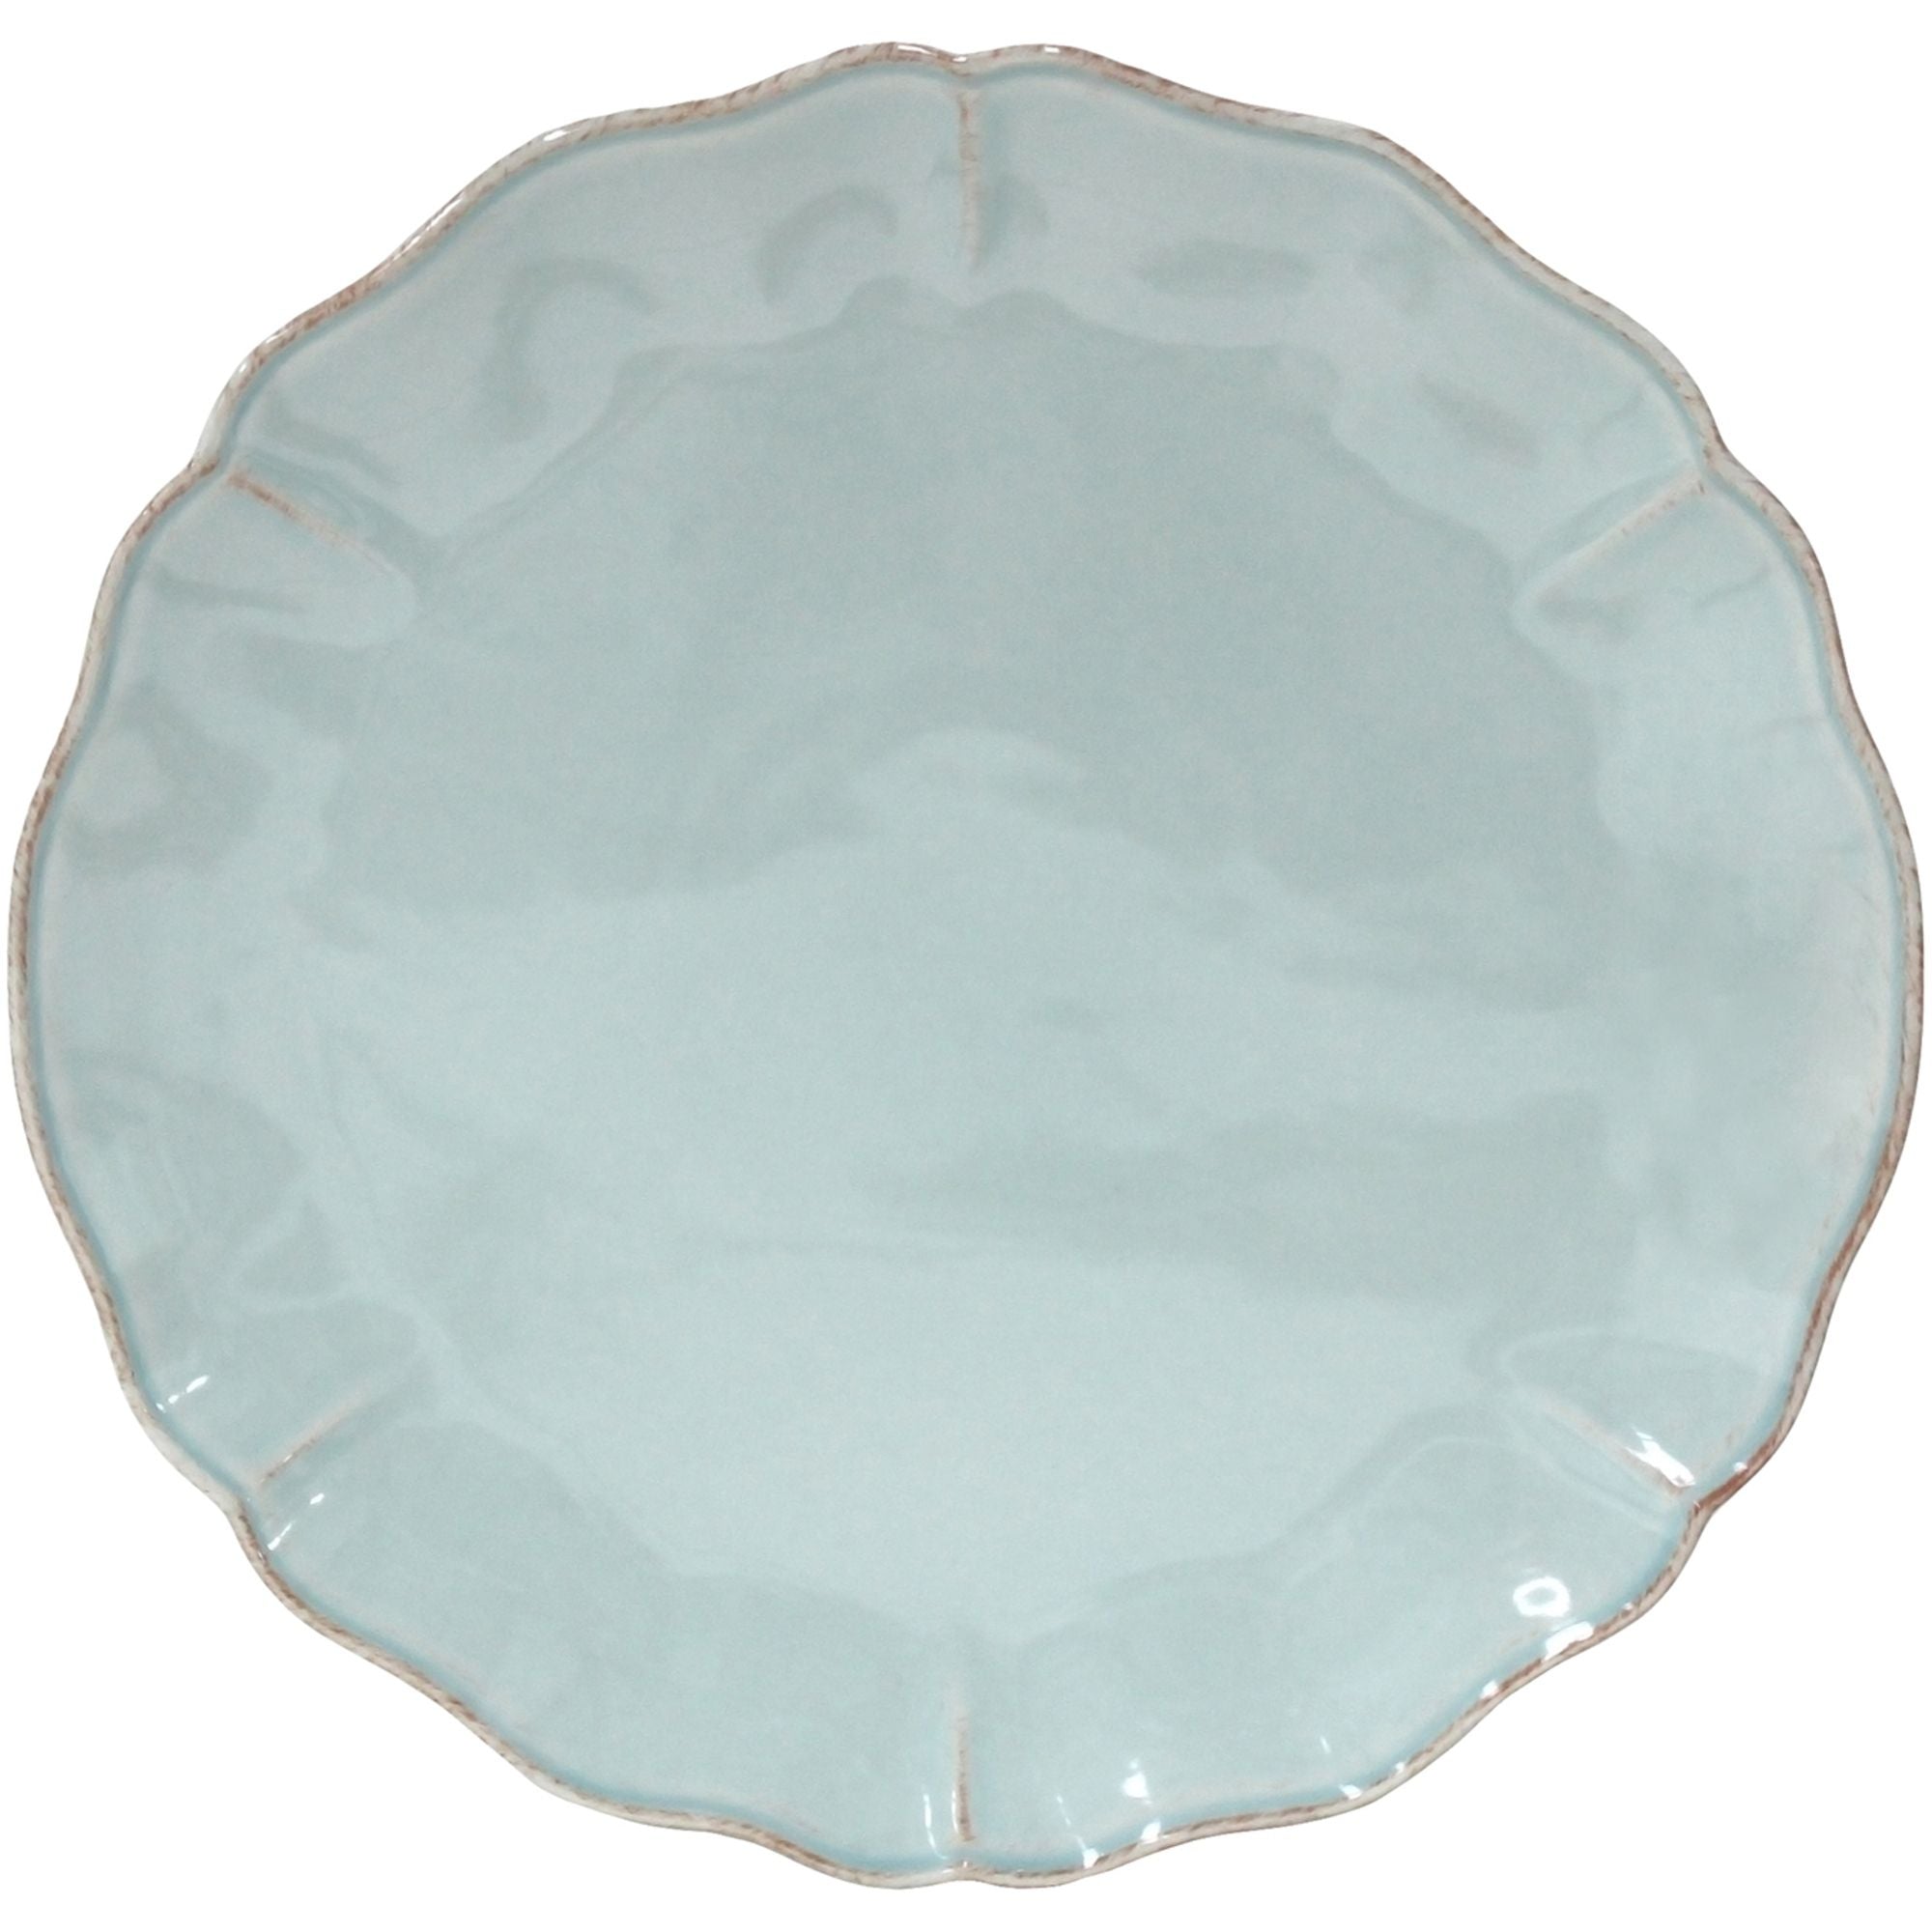 Alentejo Charger Plate/Platter 13" Turquoise